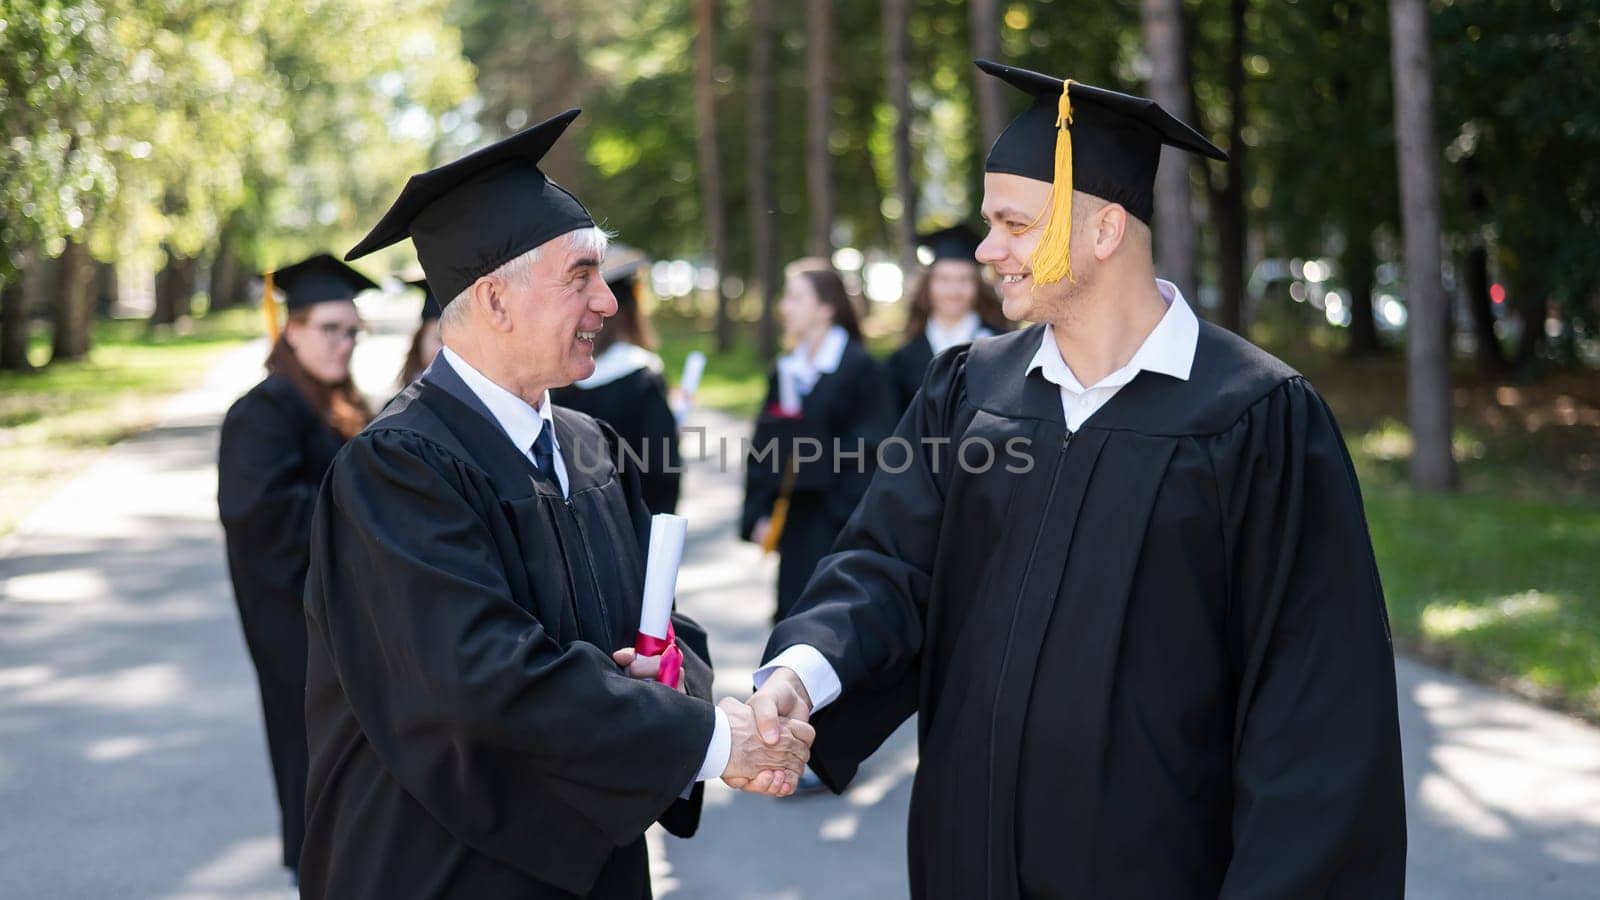 A group of graduates in robes outdoors. An elderly man and a young guy congratulate each other on receiving a diploma